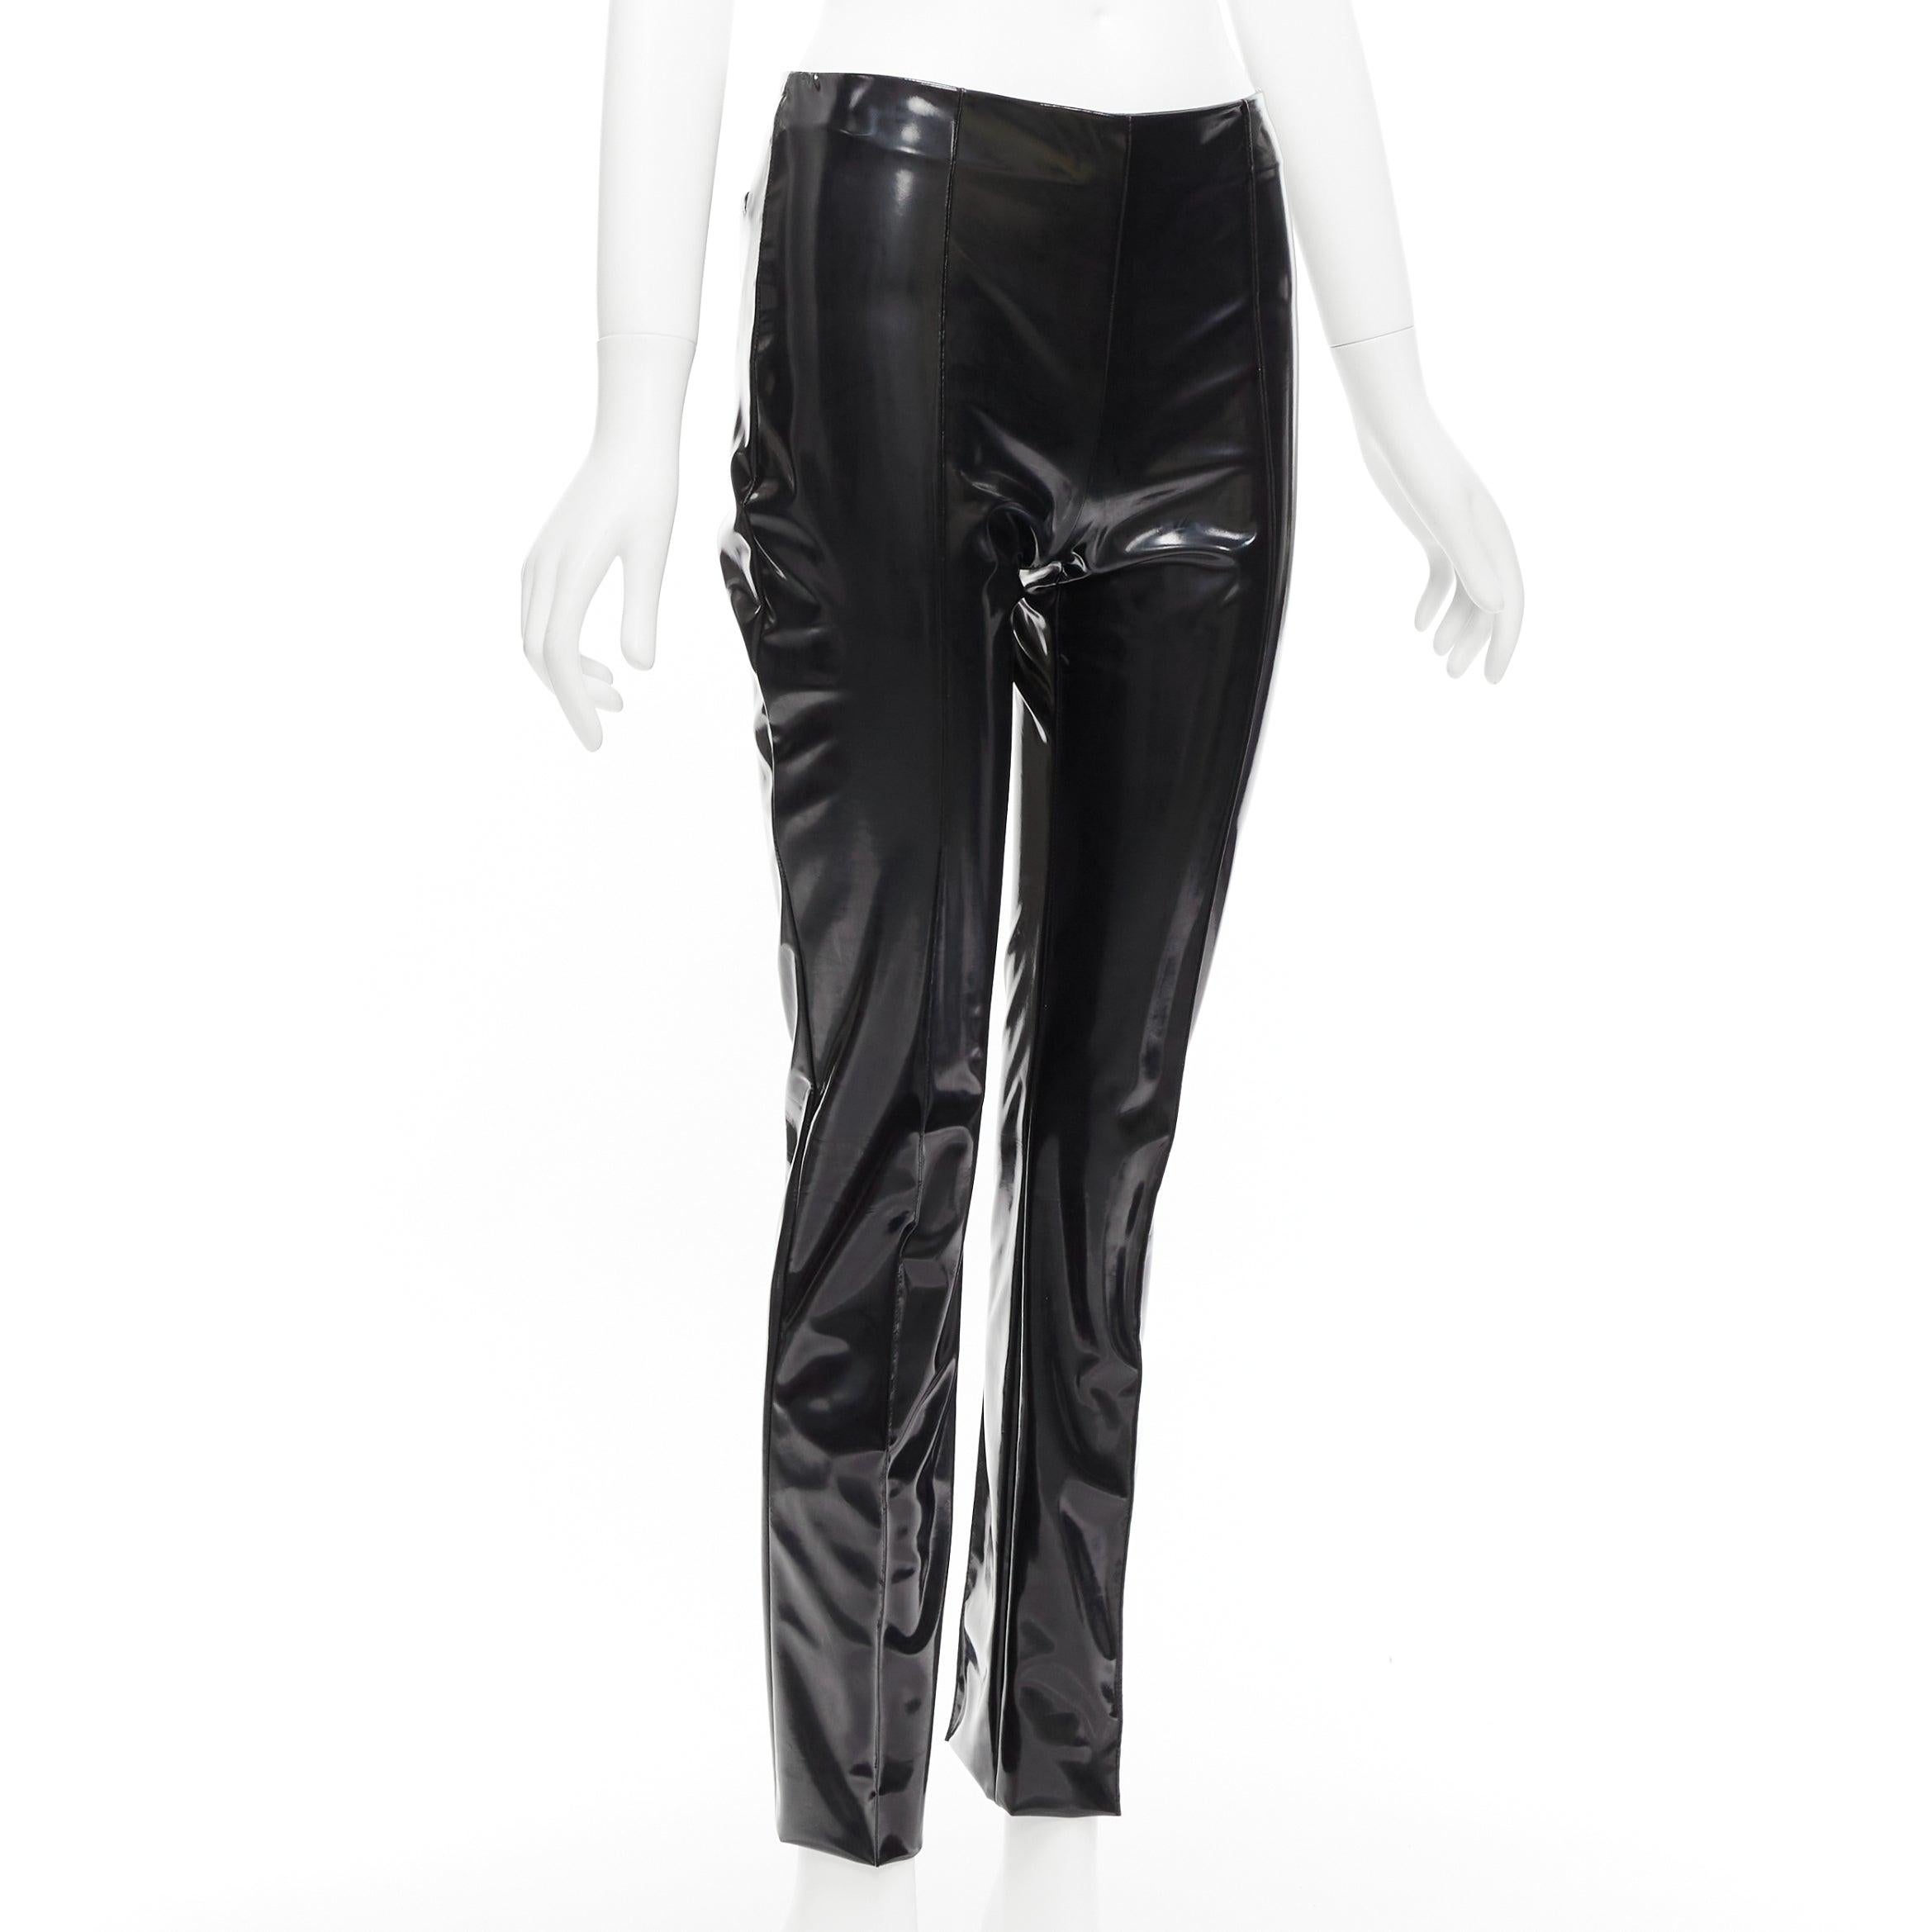 VALENTINO black vinyl pleat front back slit pockets pants S
Reference: NKLL/A00060
Brand: Valentino
Designer: Pier Paolo Piccioli
Material: Fabric
Color: Black
Pattern: Solid
Closure: Zip
Extra Details: Side zip. Back slit pockets.
Made in: